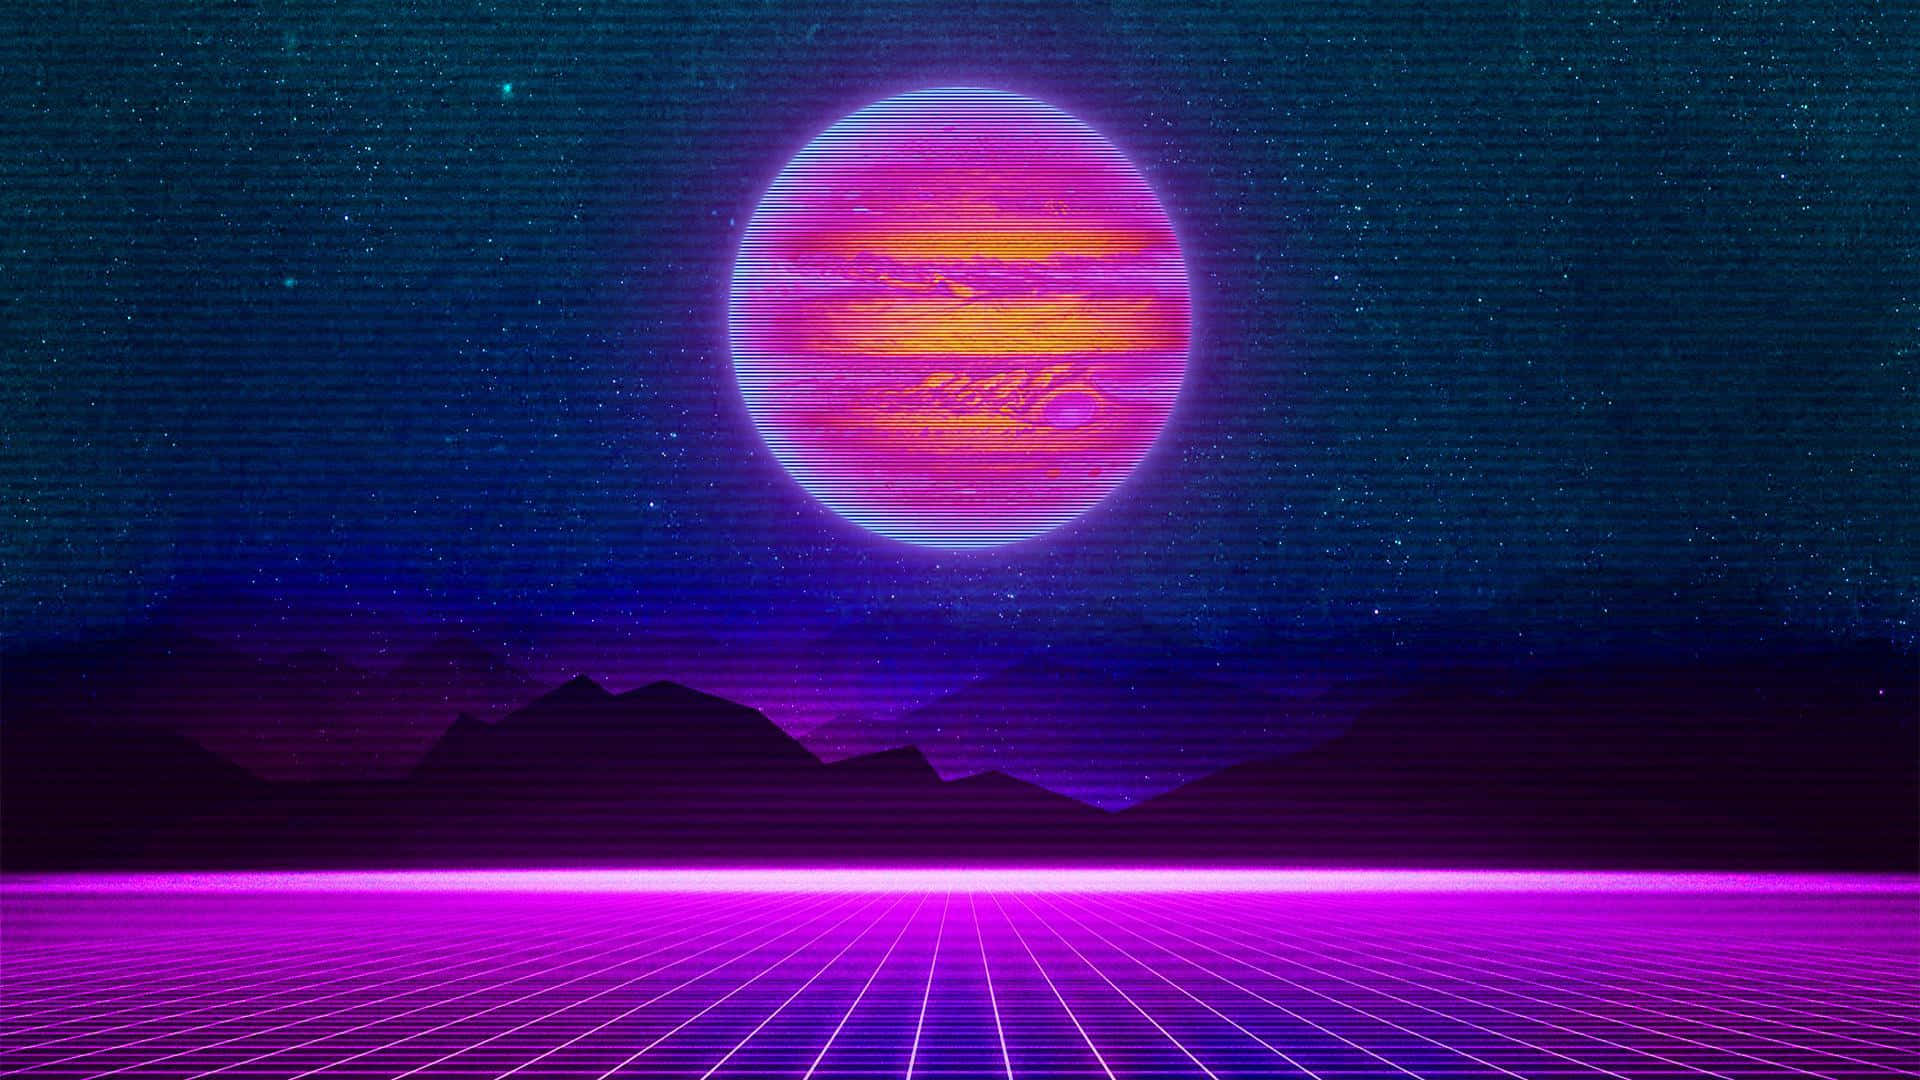 “A vivid, neon-infused Retrowave background, perfect for any music or art enthusiast.”